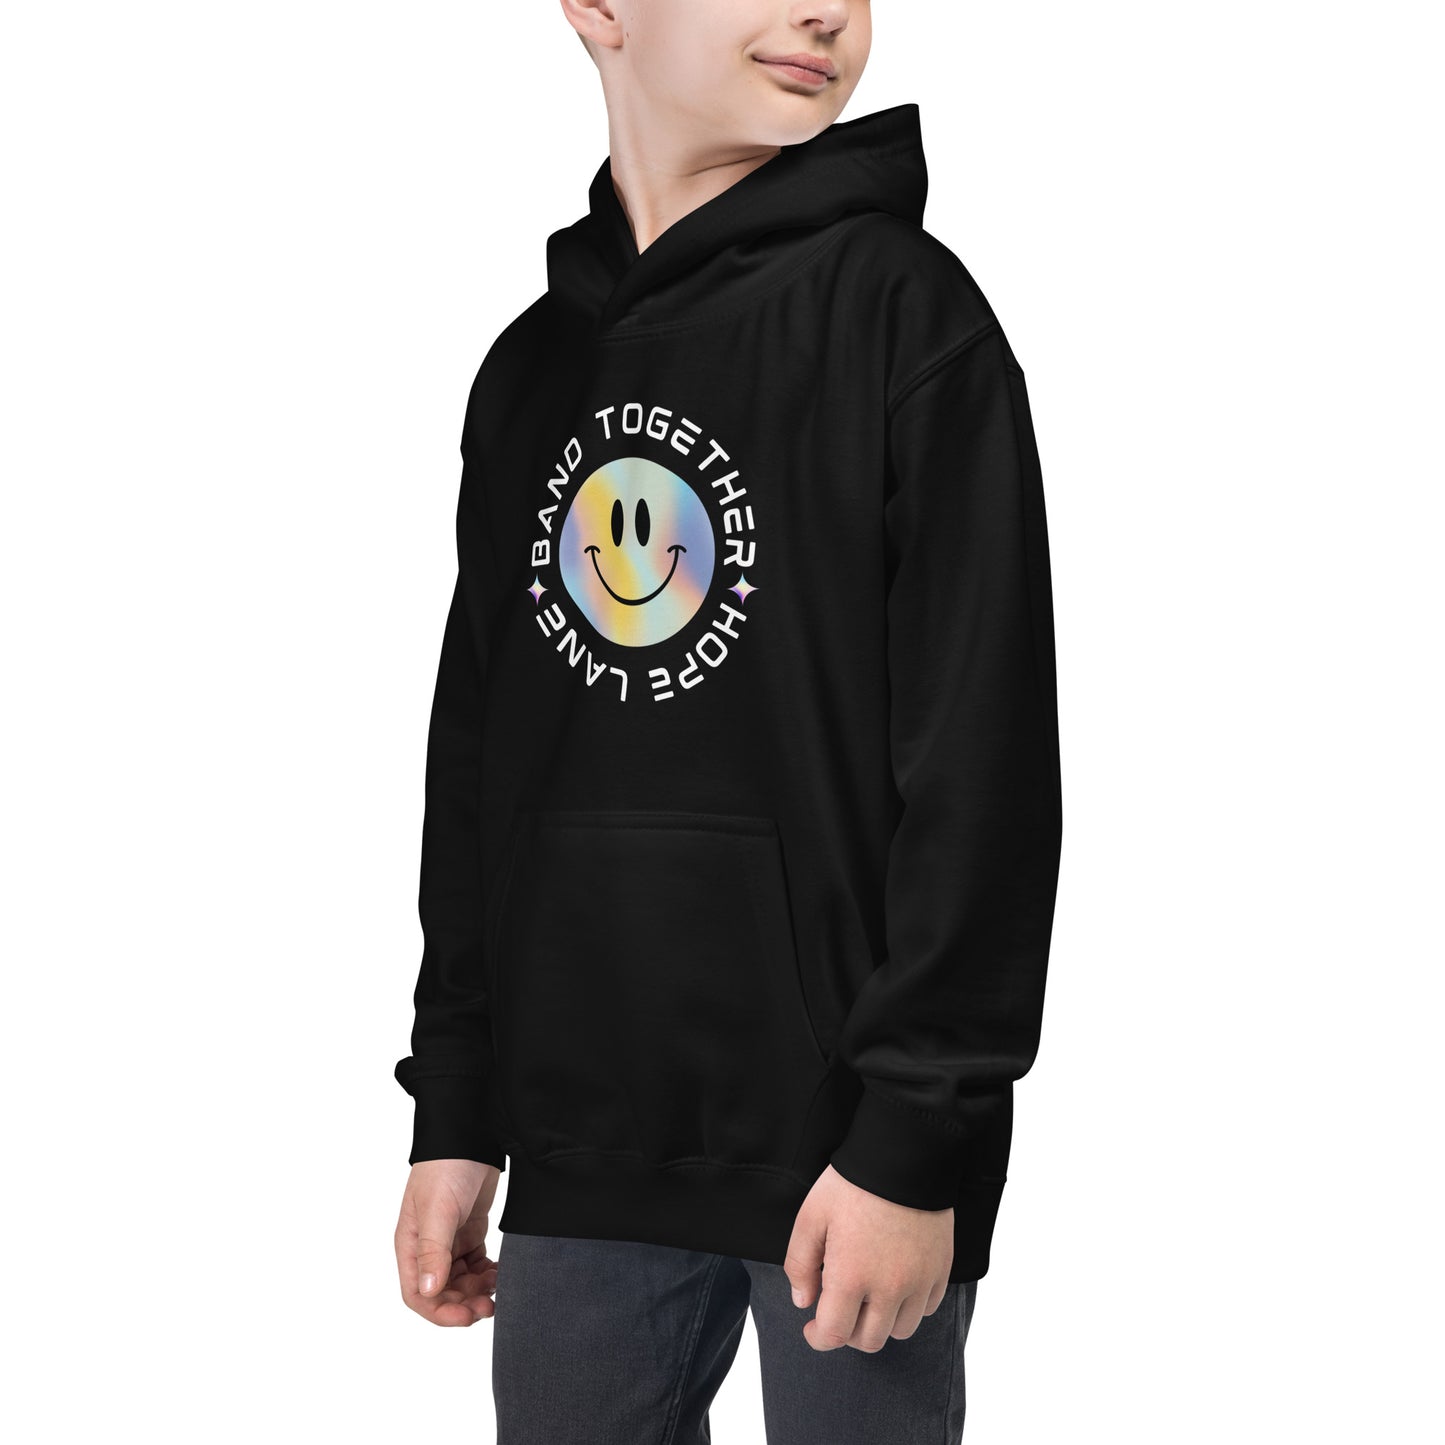 'Band Together' Kids Hoodie (official Hope Lane merch)